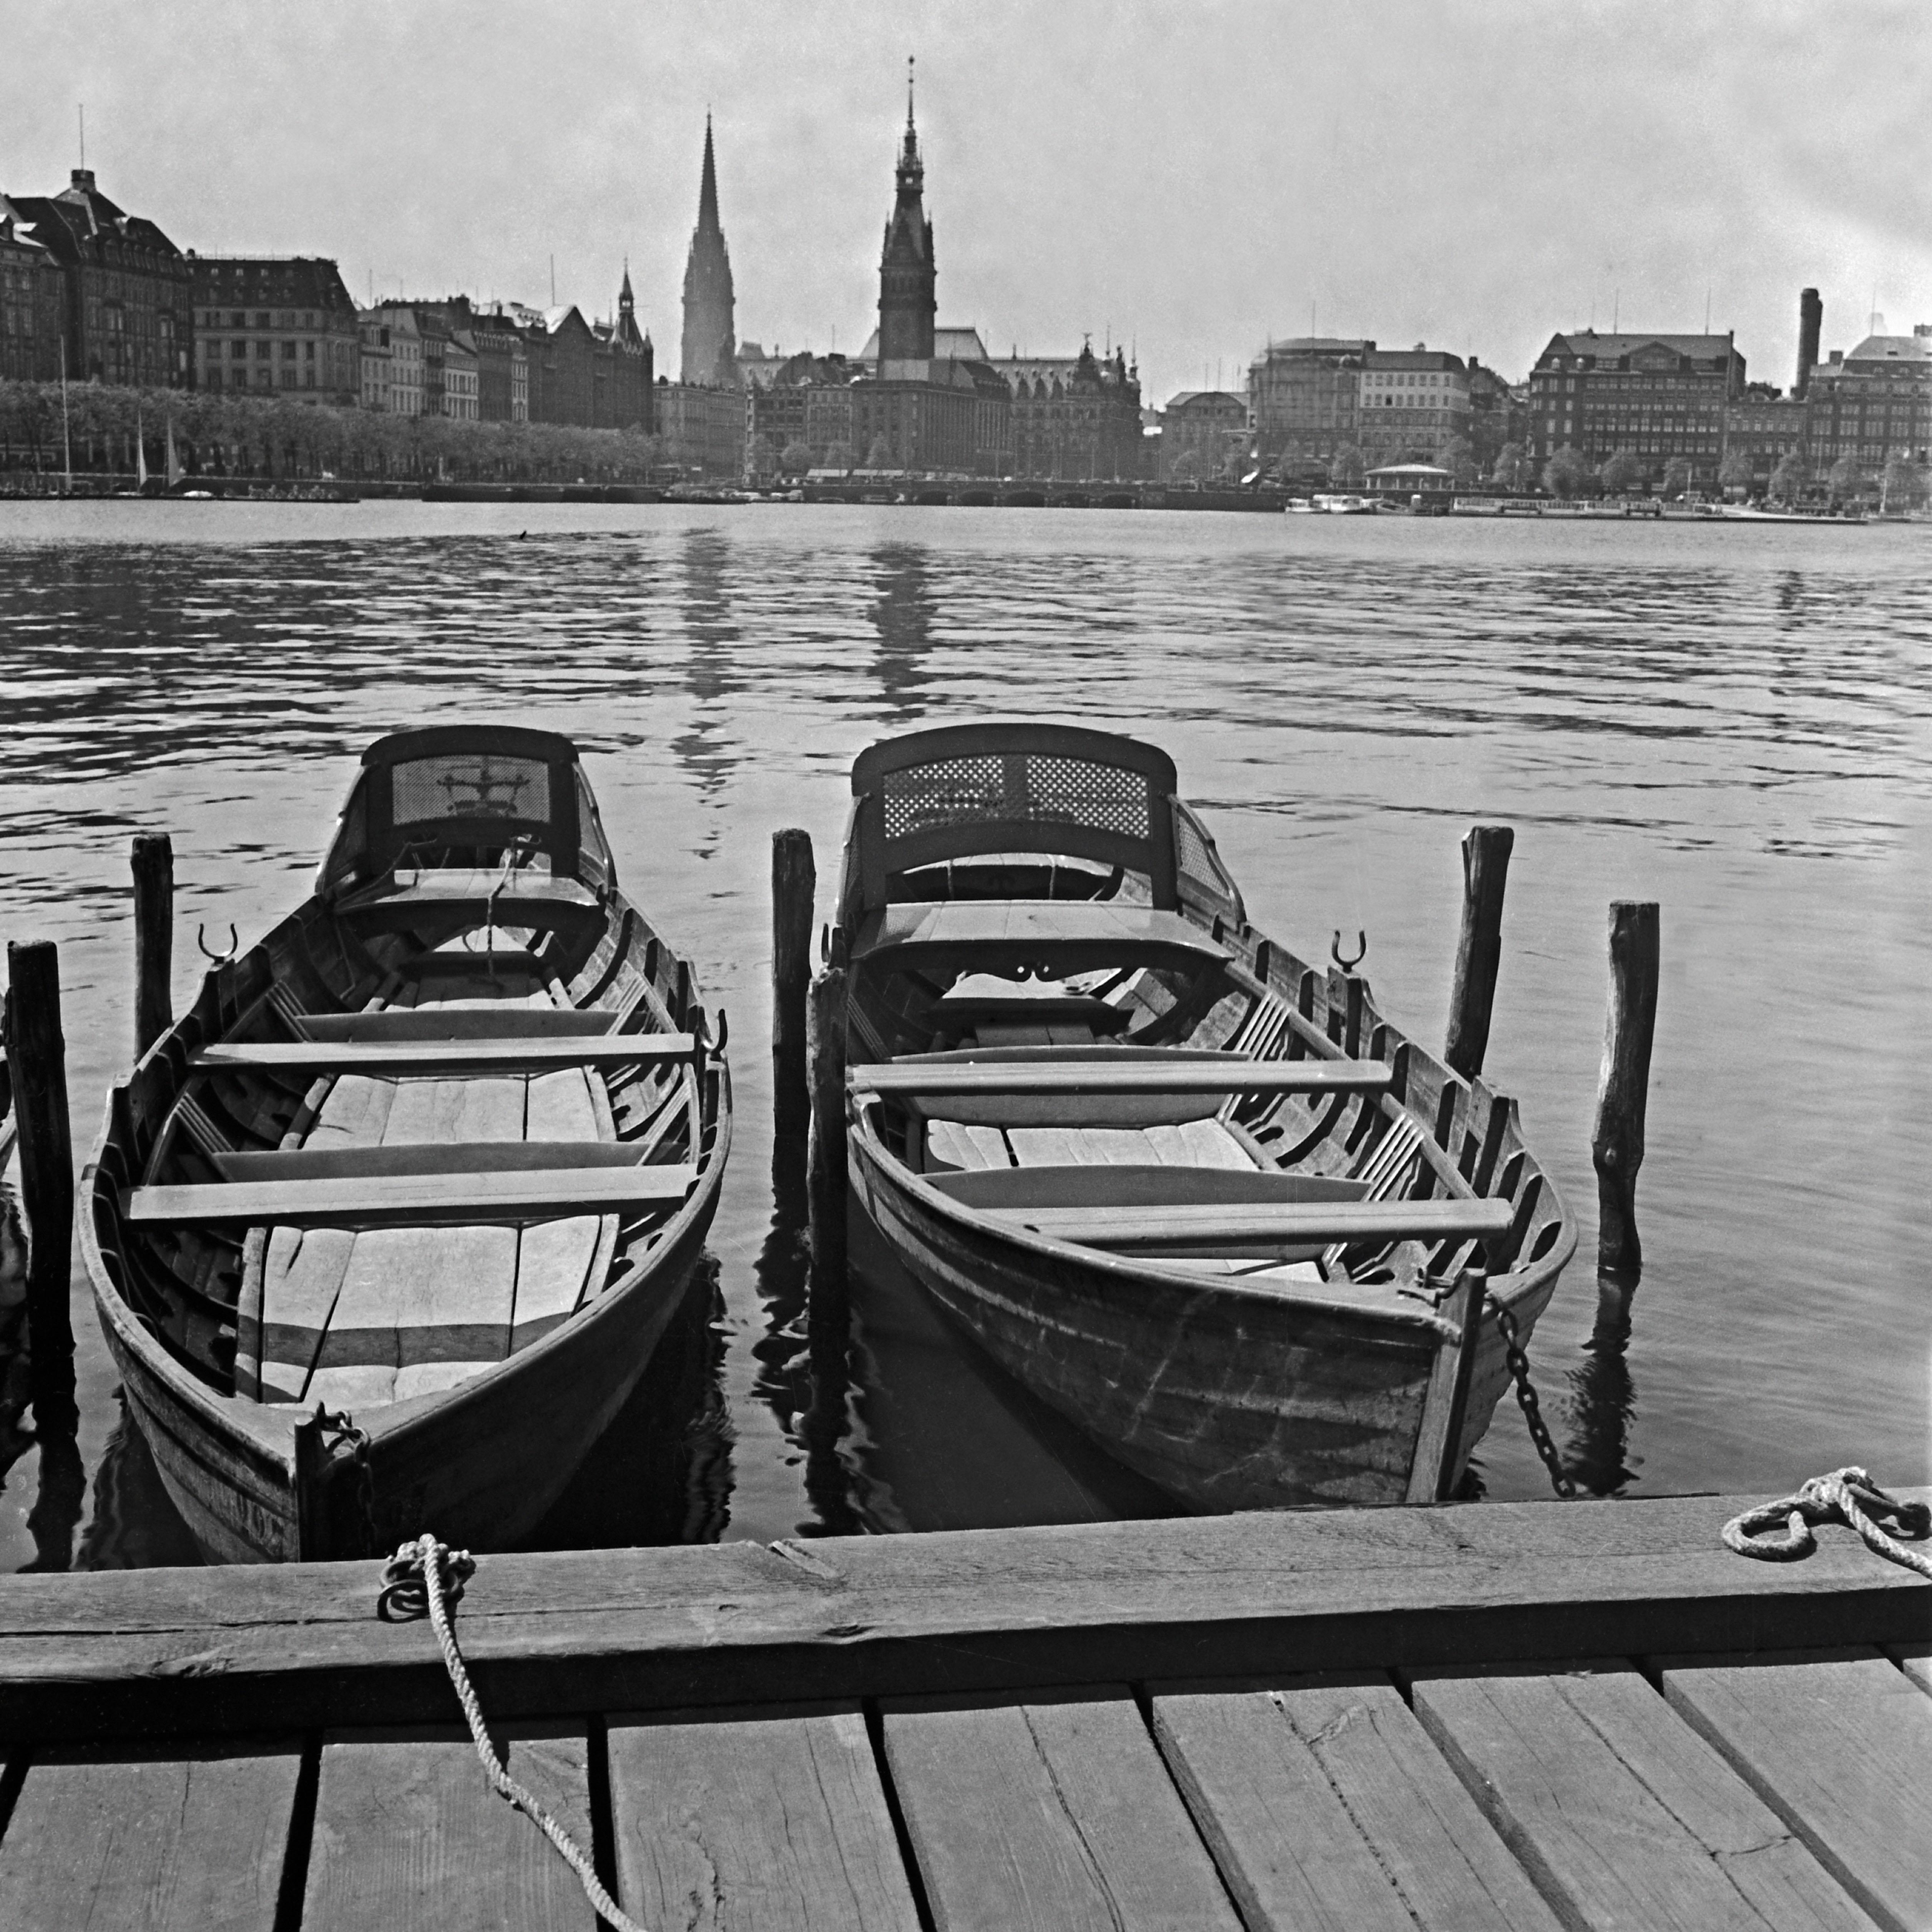 Karl Heinrich Lämmel Black and White Photograph - Boats at quay on Alster view to Hamburg city hall, Germany 1938, Printed Later 